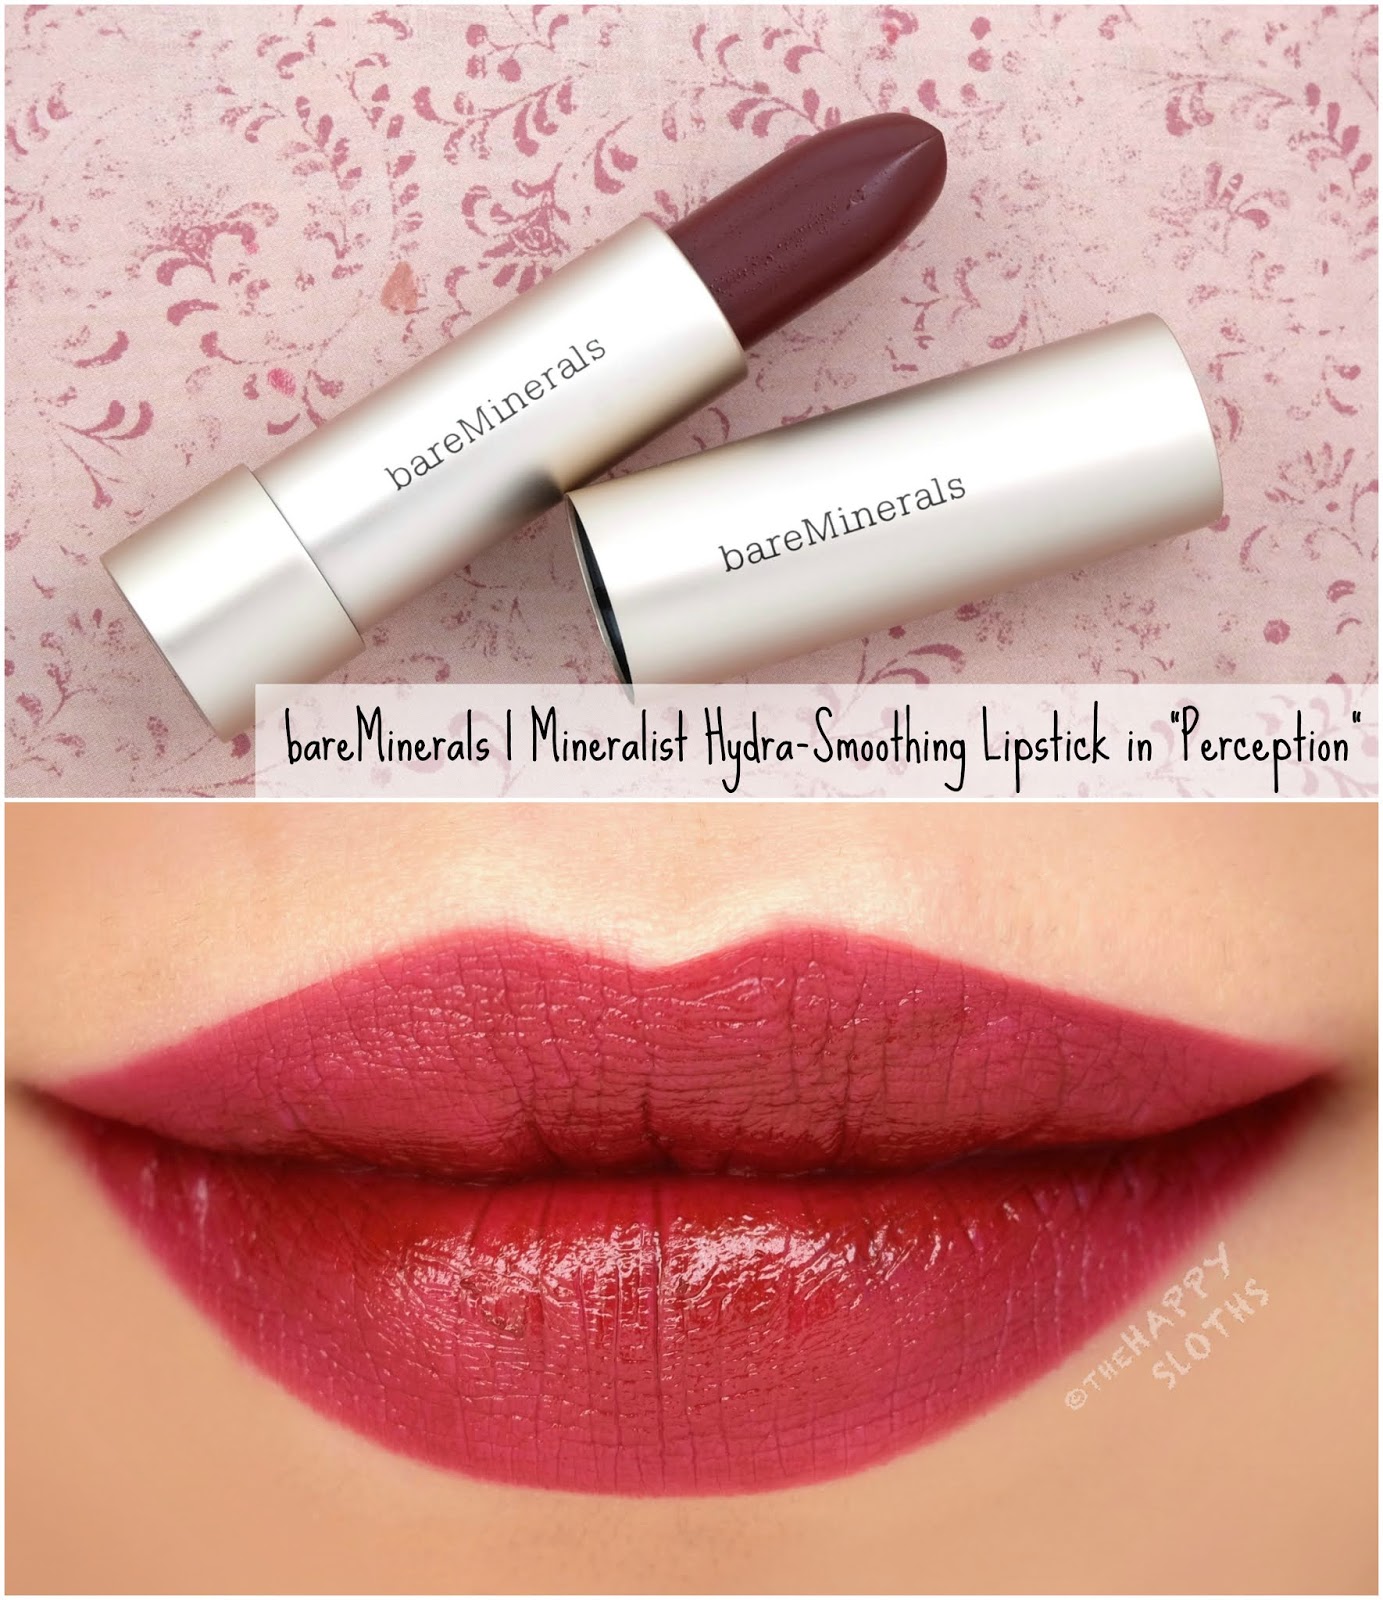 bareMinerals | Mineralist Hydra-Smoothing Lipstick in "Perception": Review and Swatches